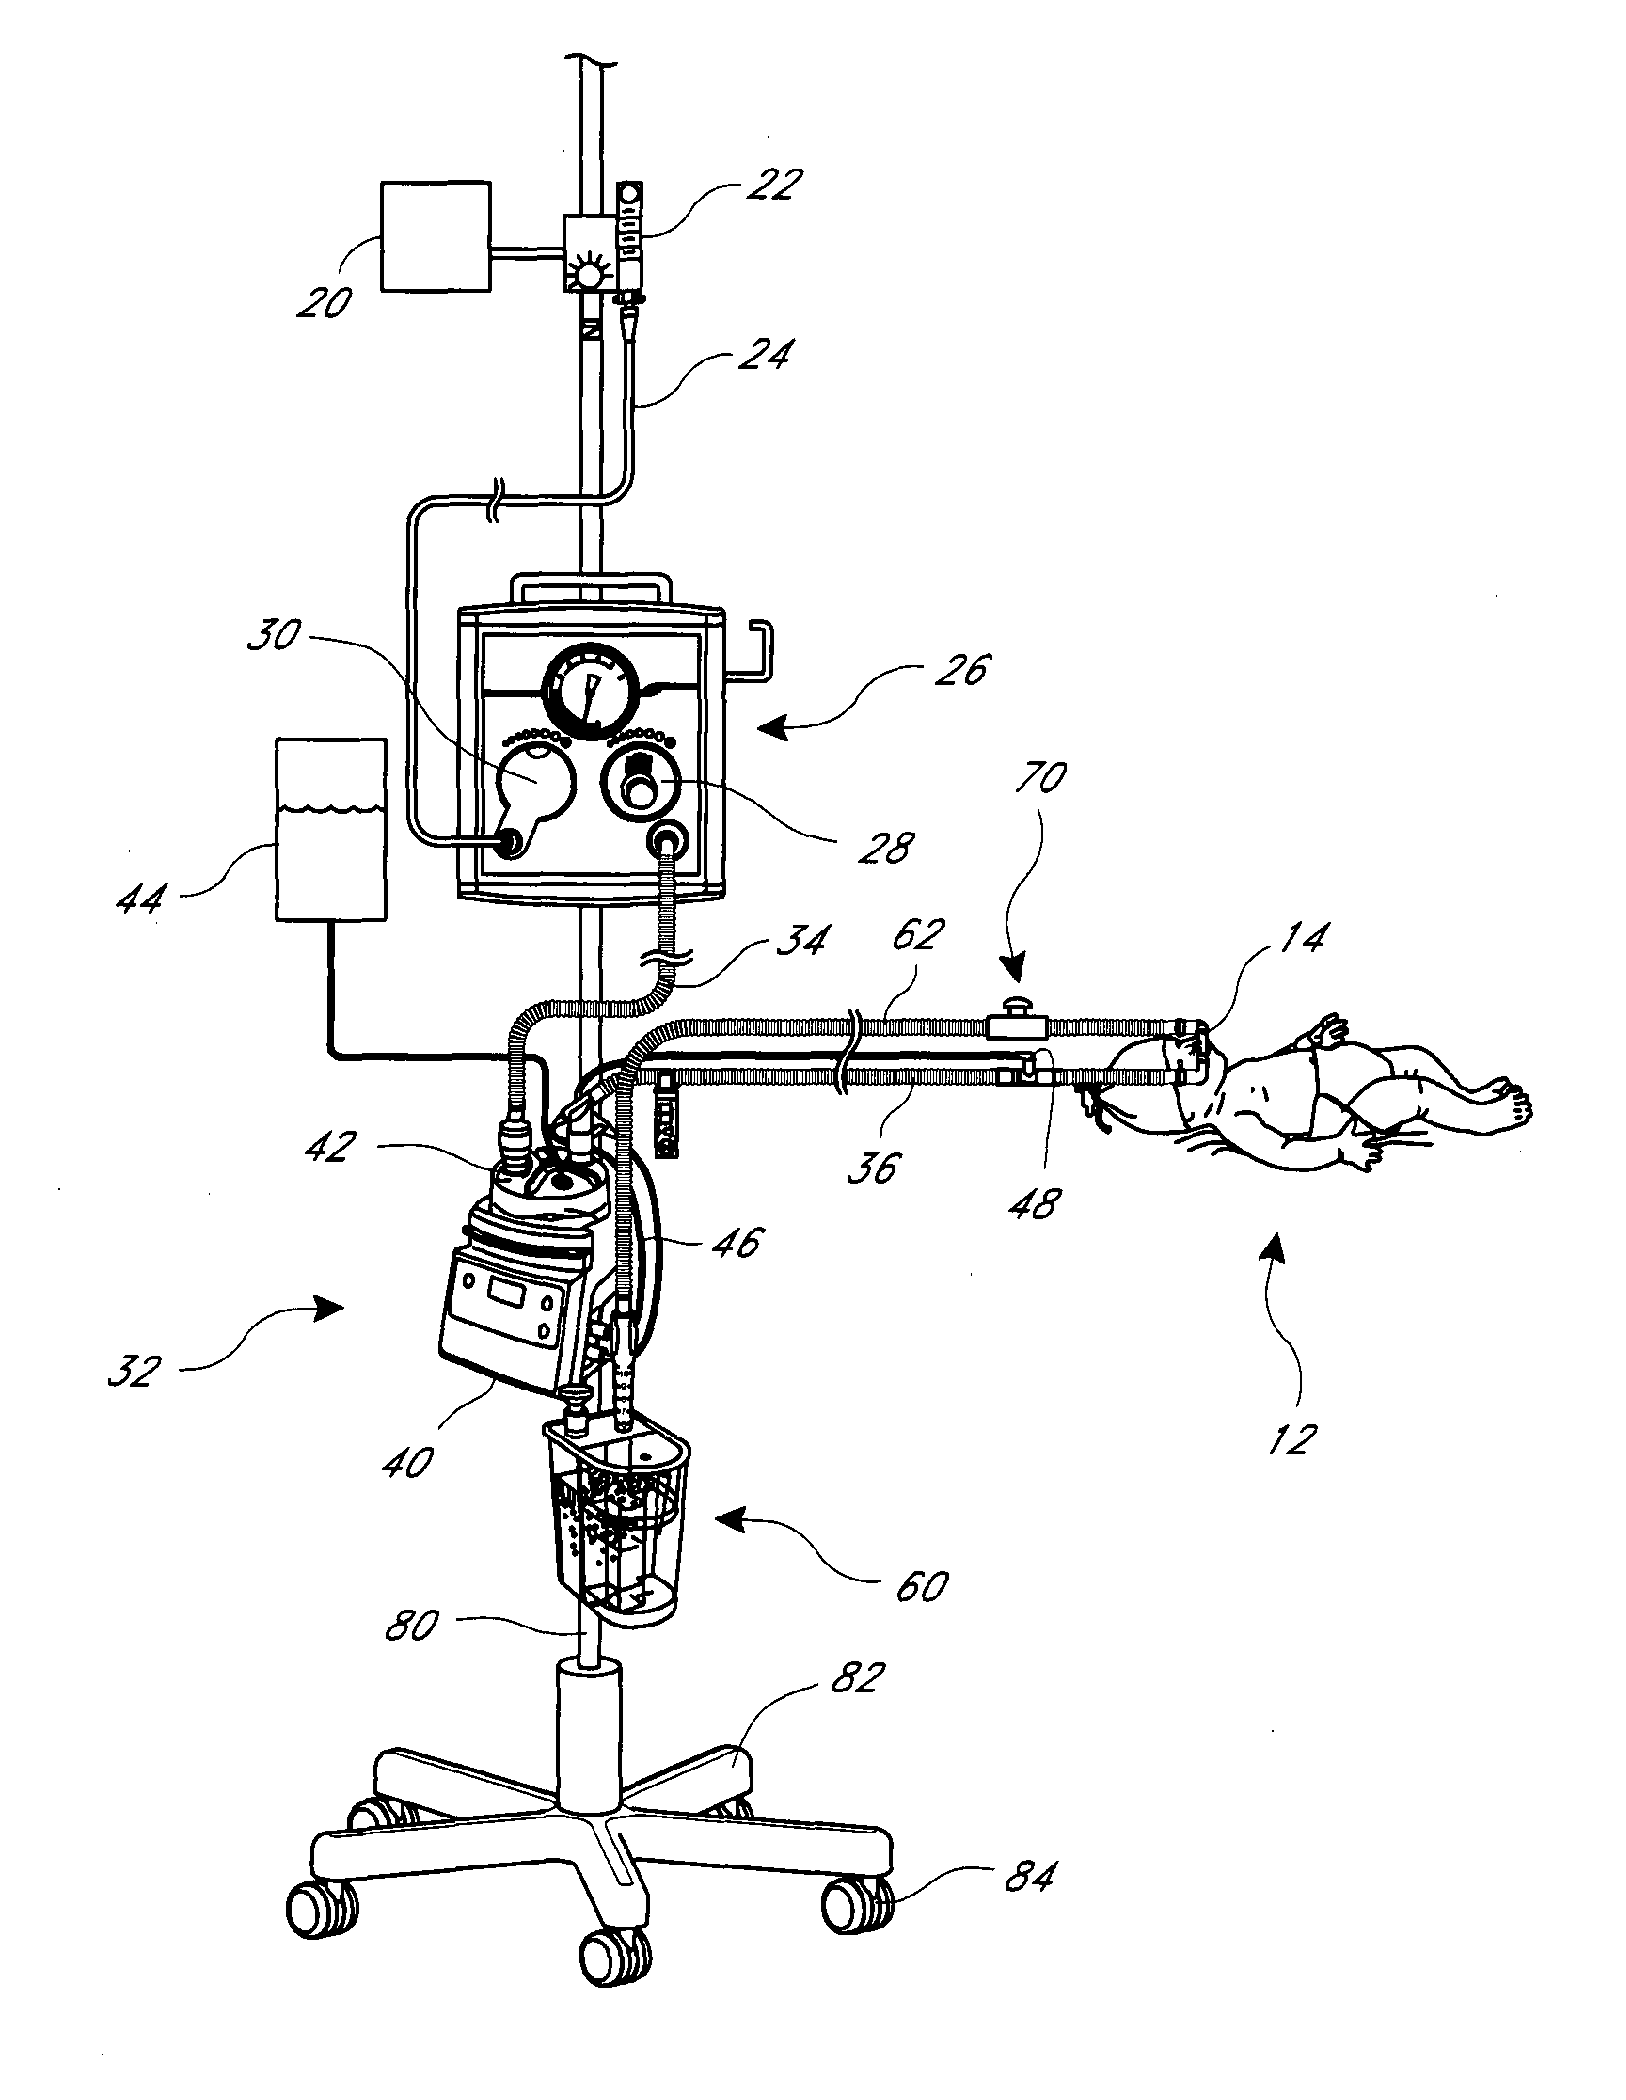 Combination cpap and resuscitation systems and methods